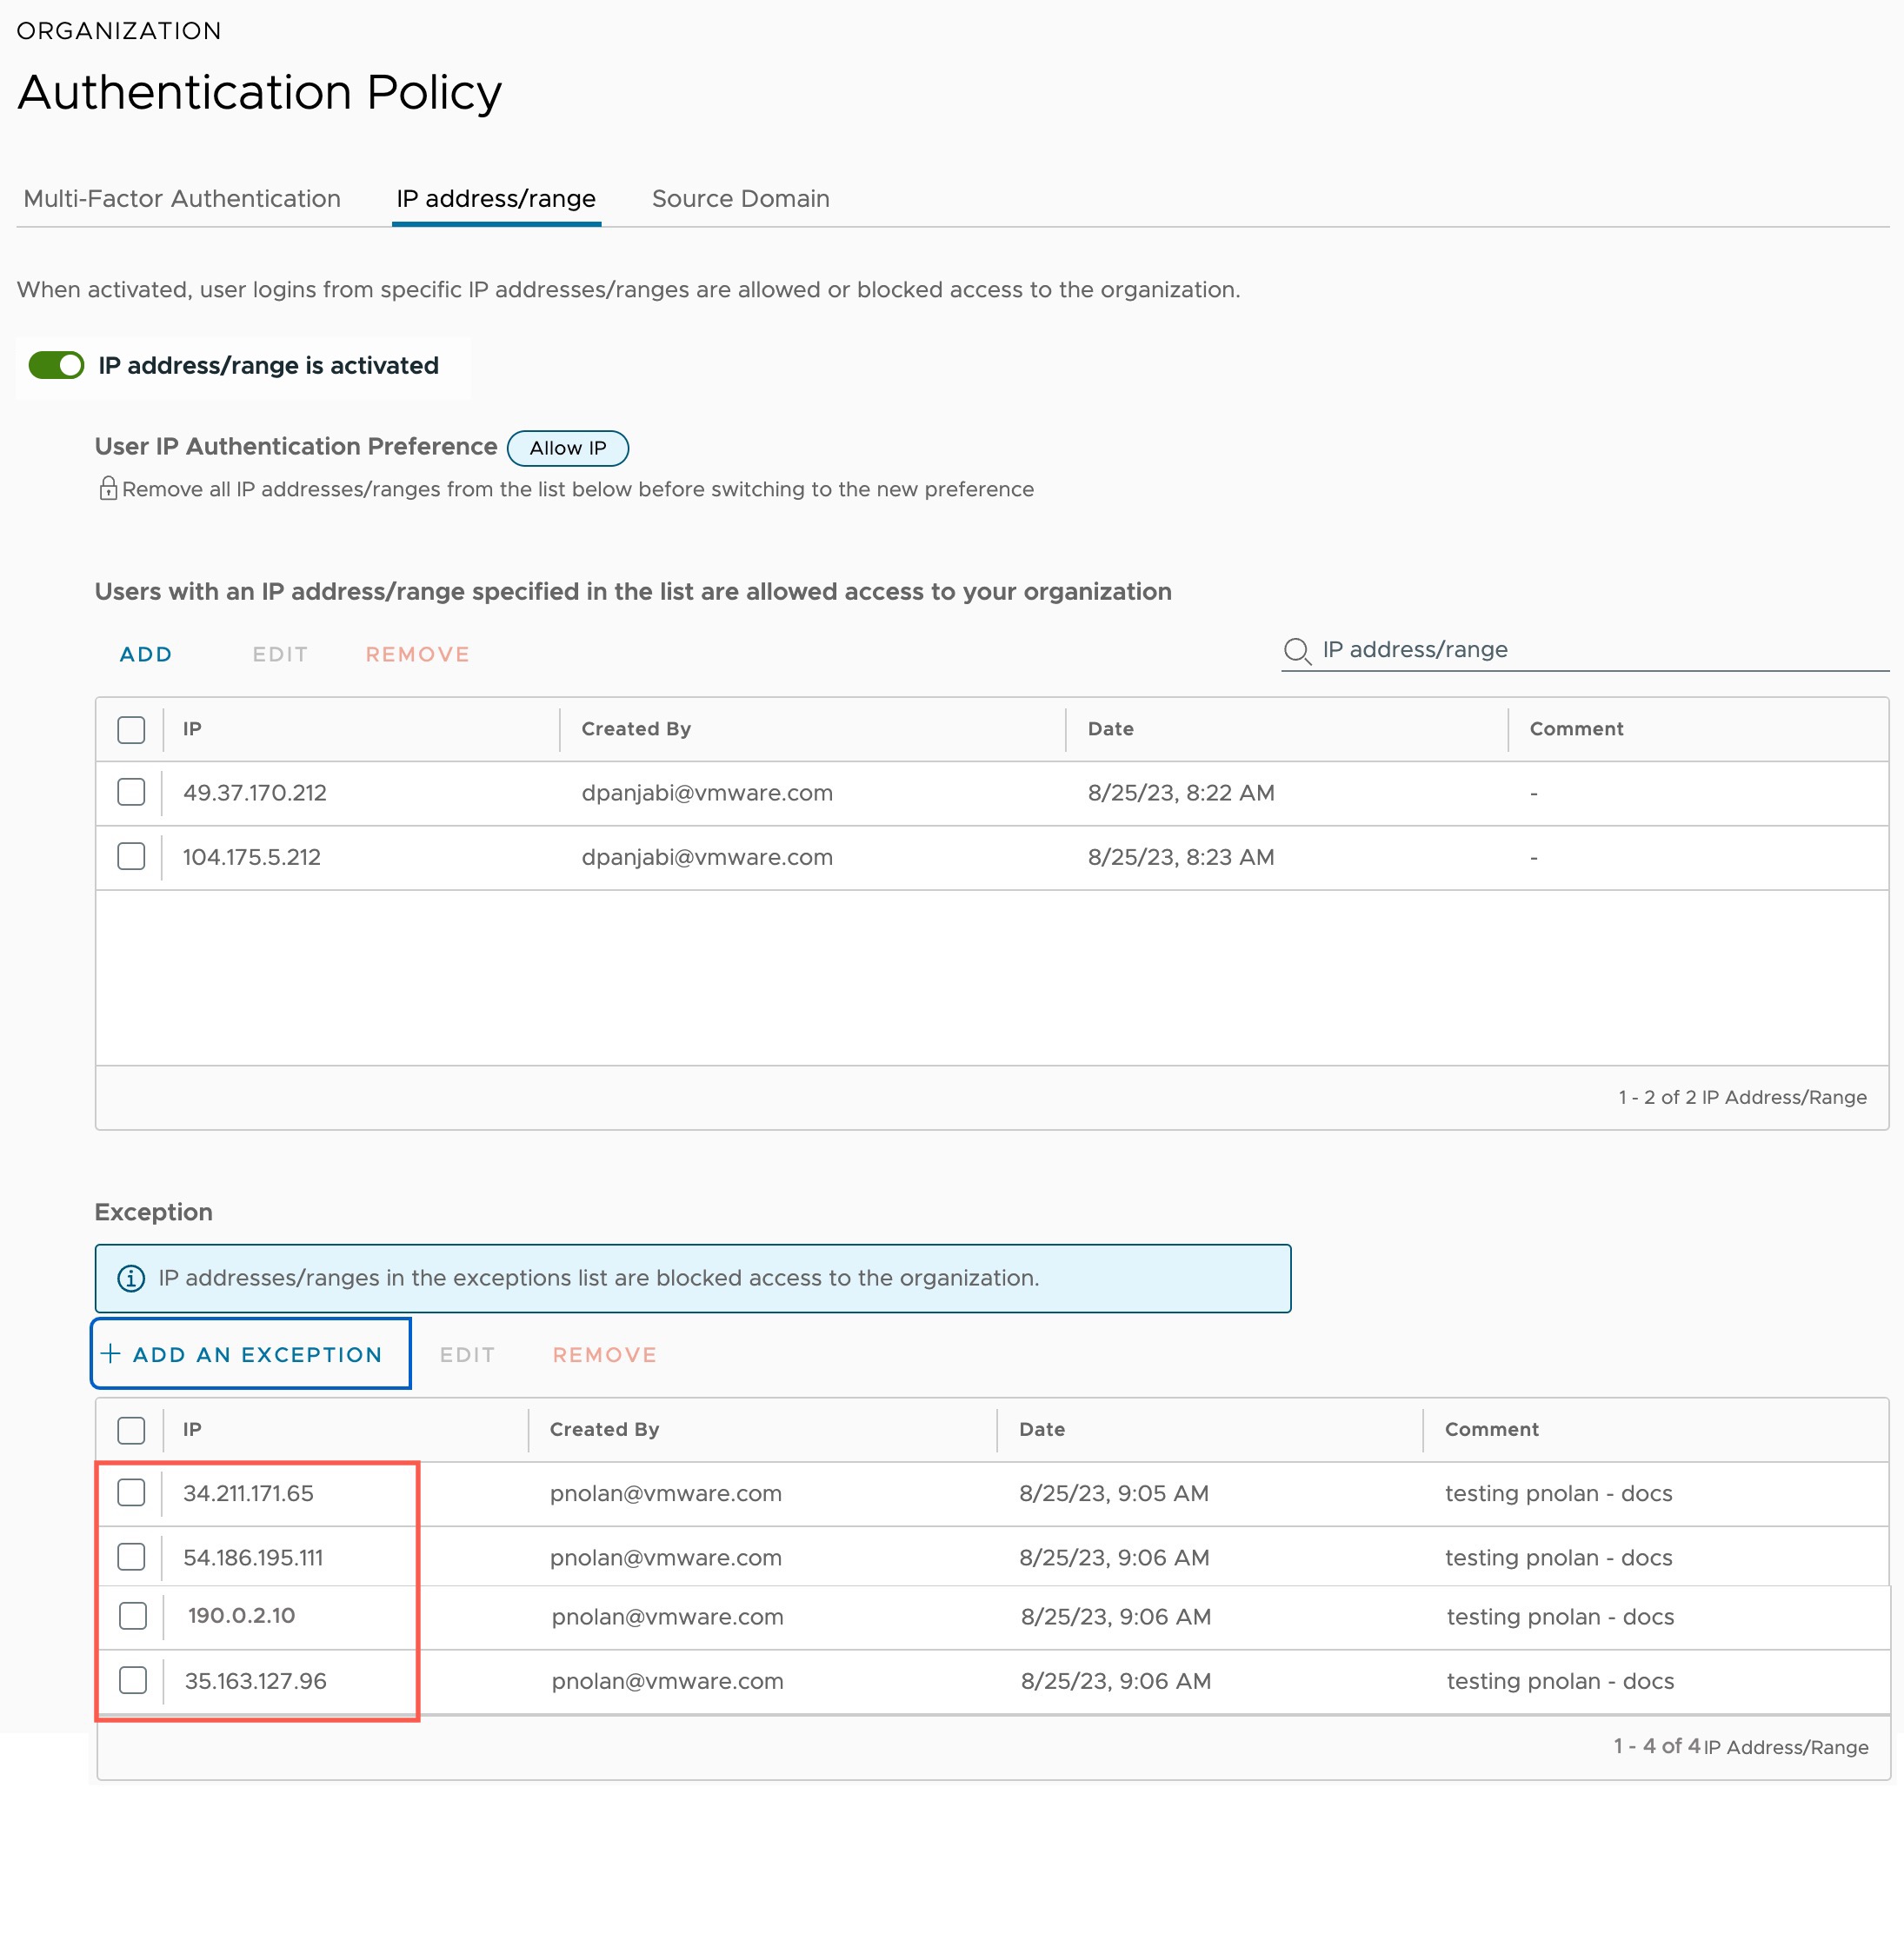 Organization authentication policy with IP address exceptions added.